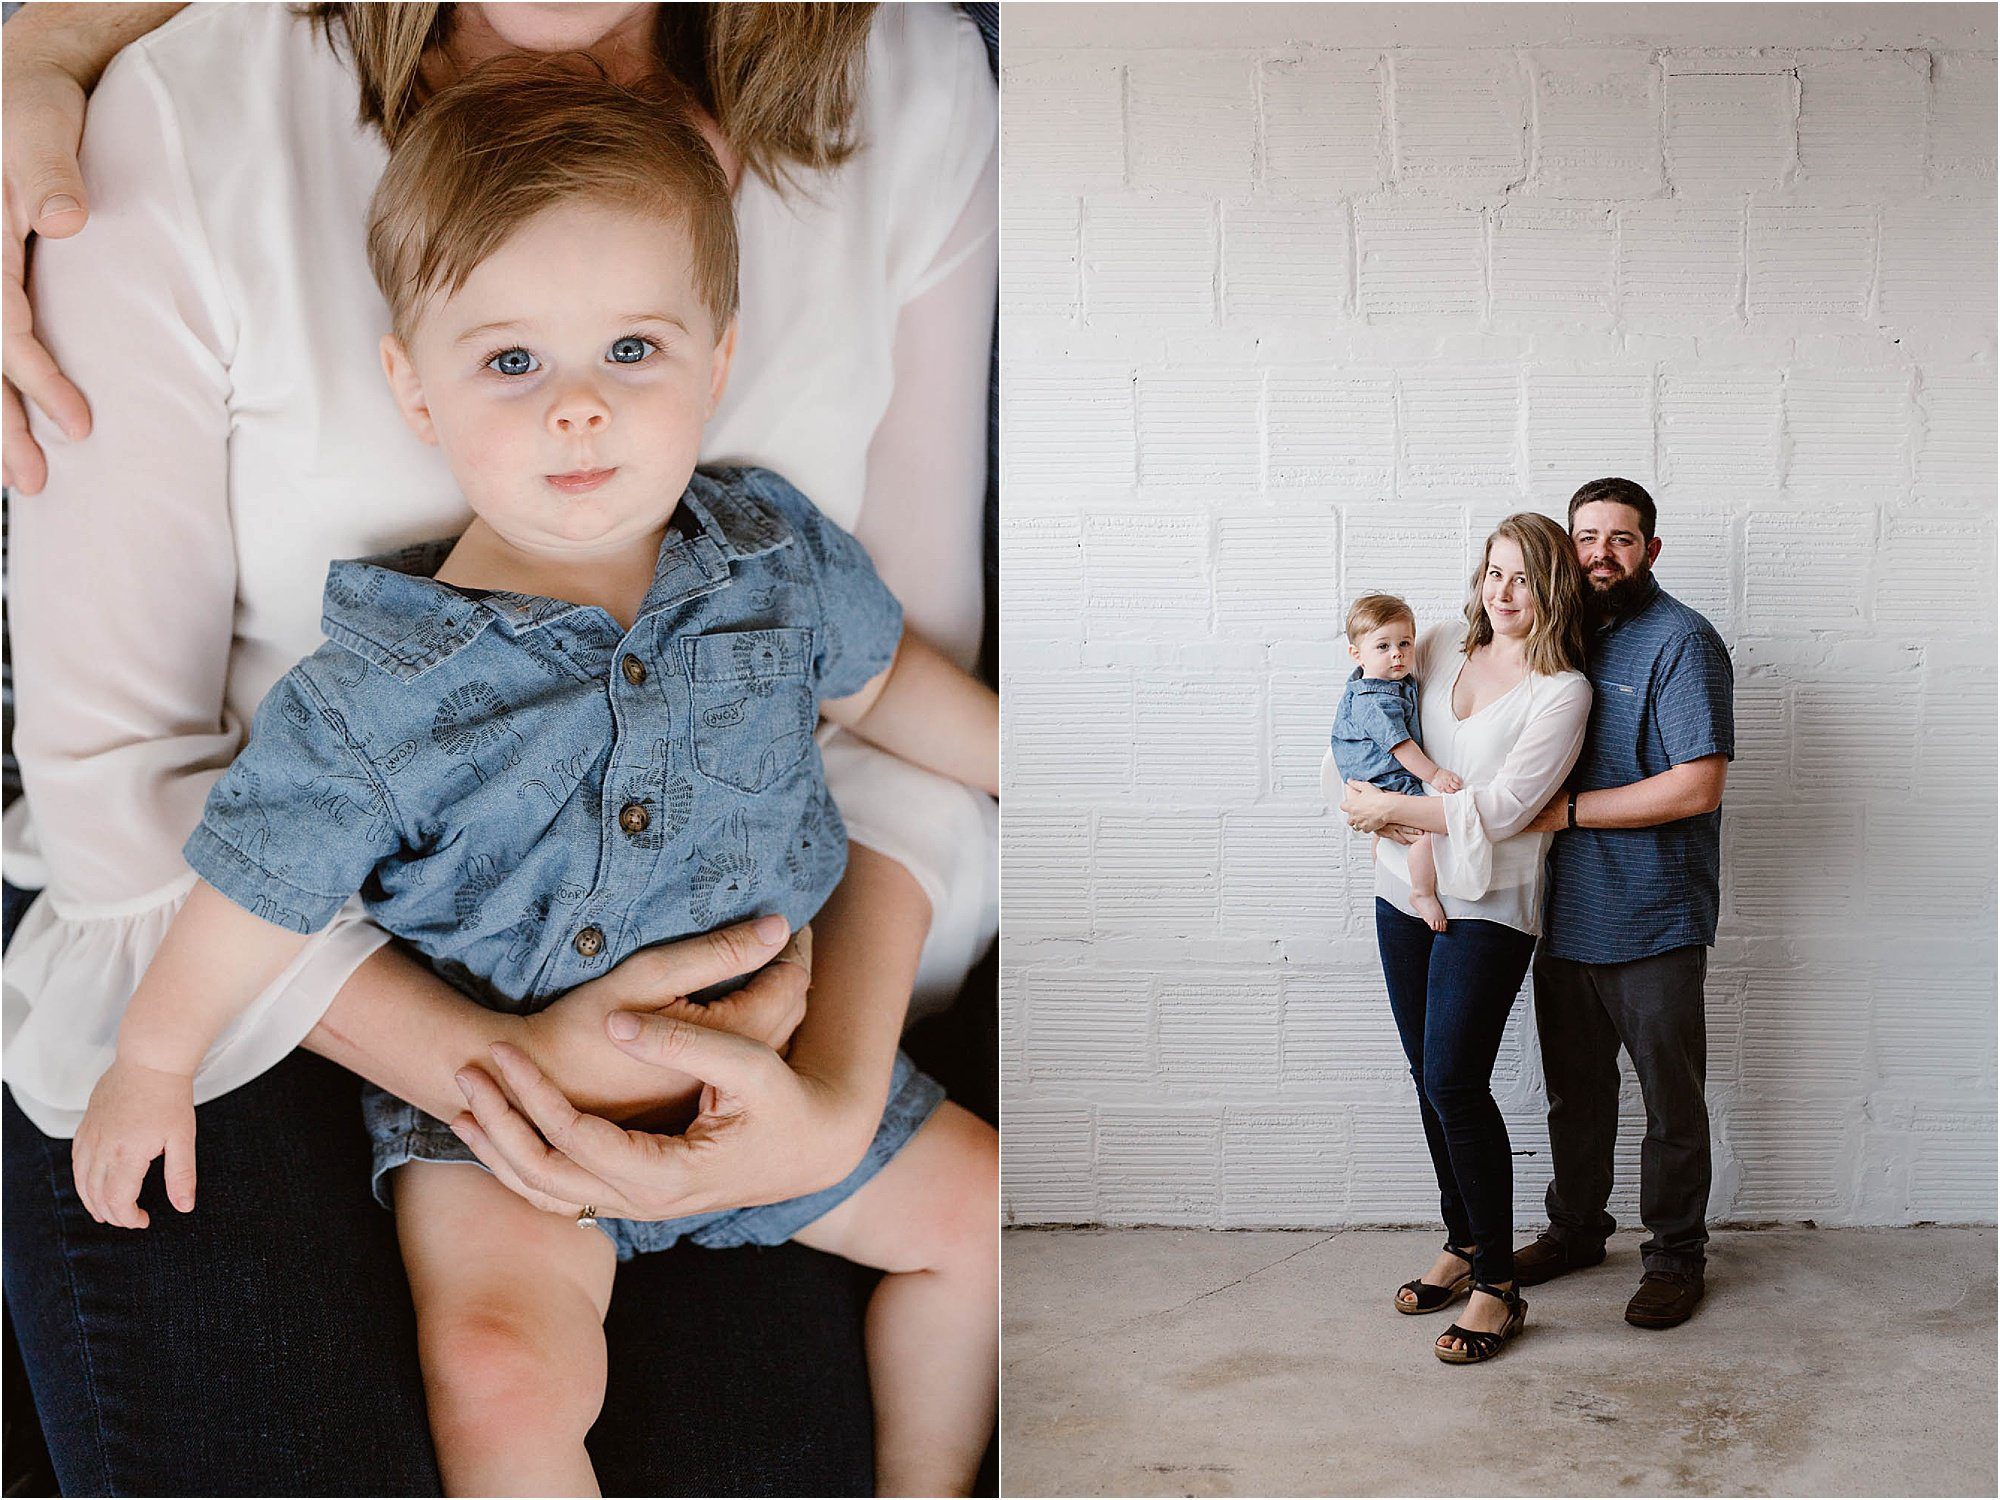 posed family photos In warehouse with man, woman, and baby